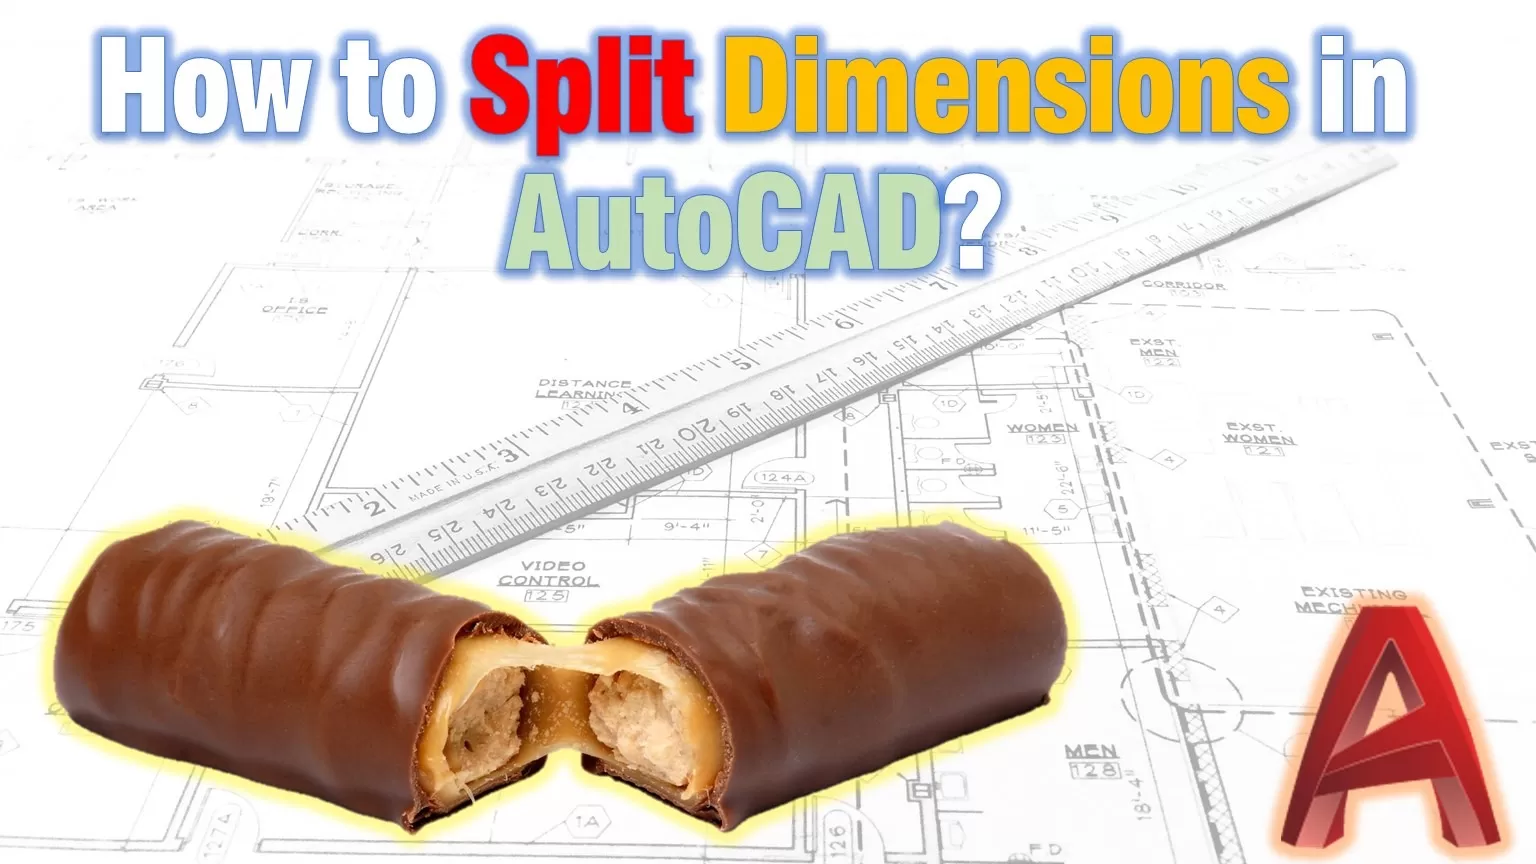 Learn how to split dimensions in AutoCAD